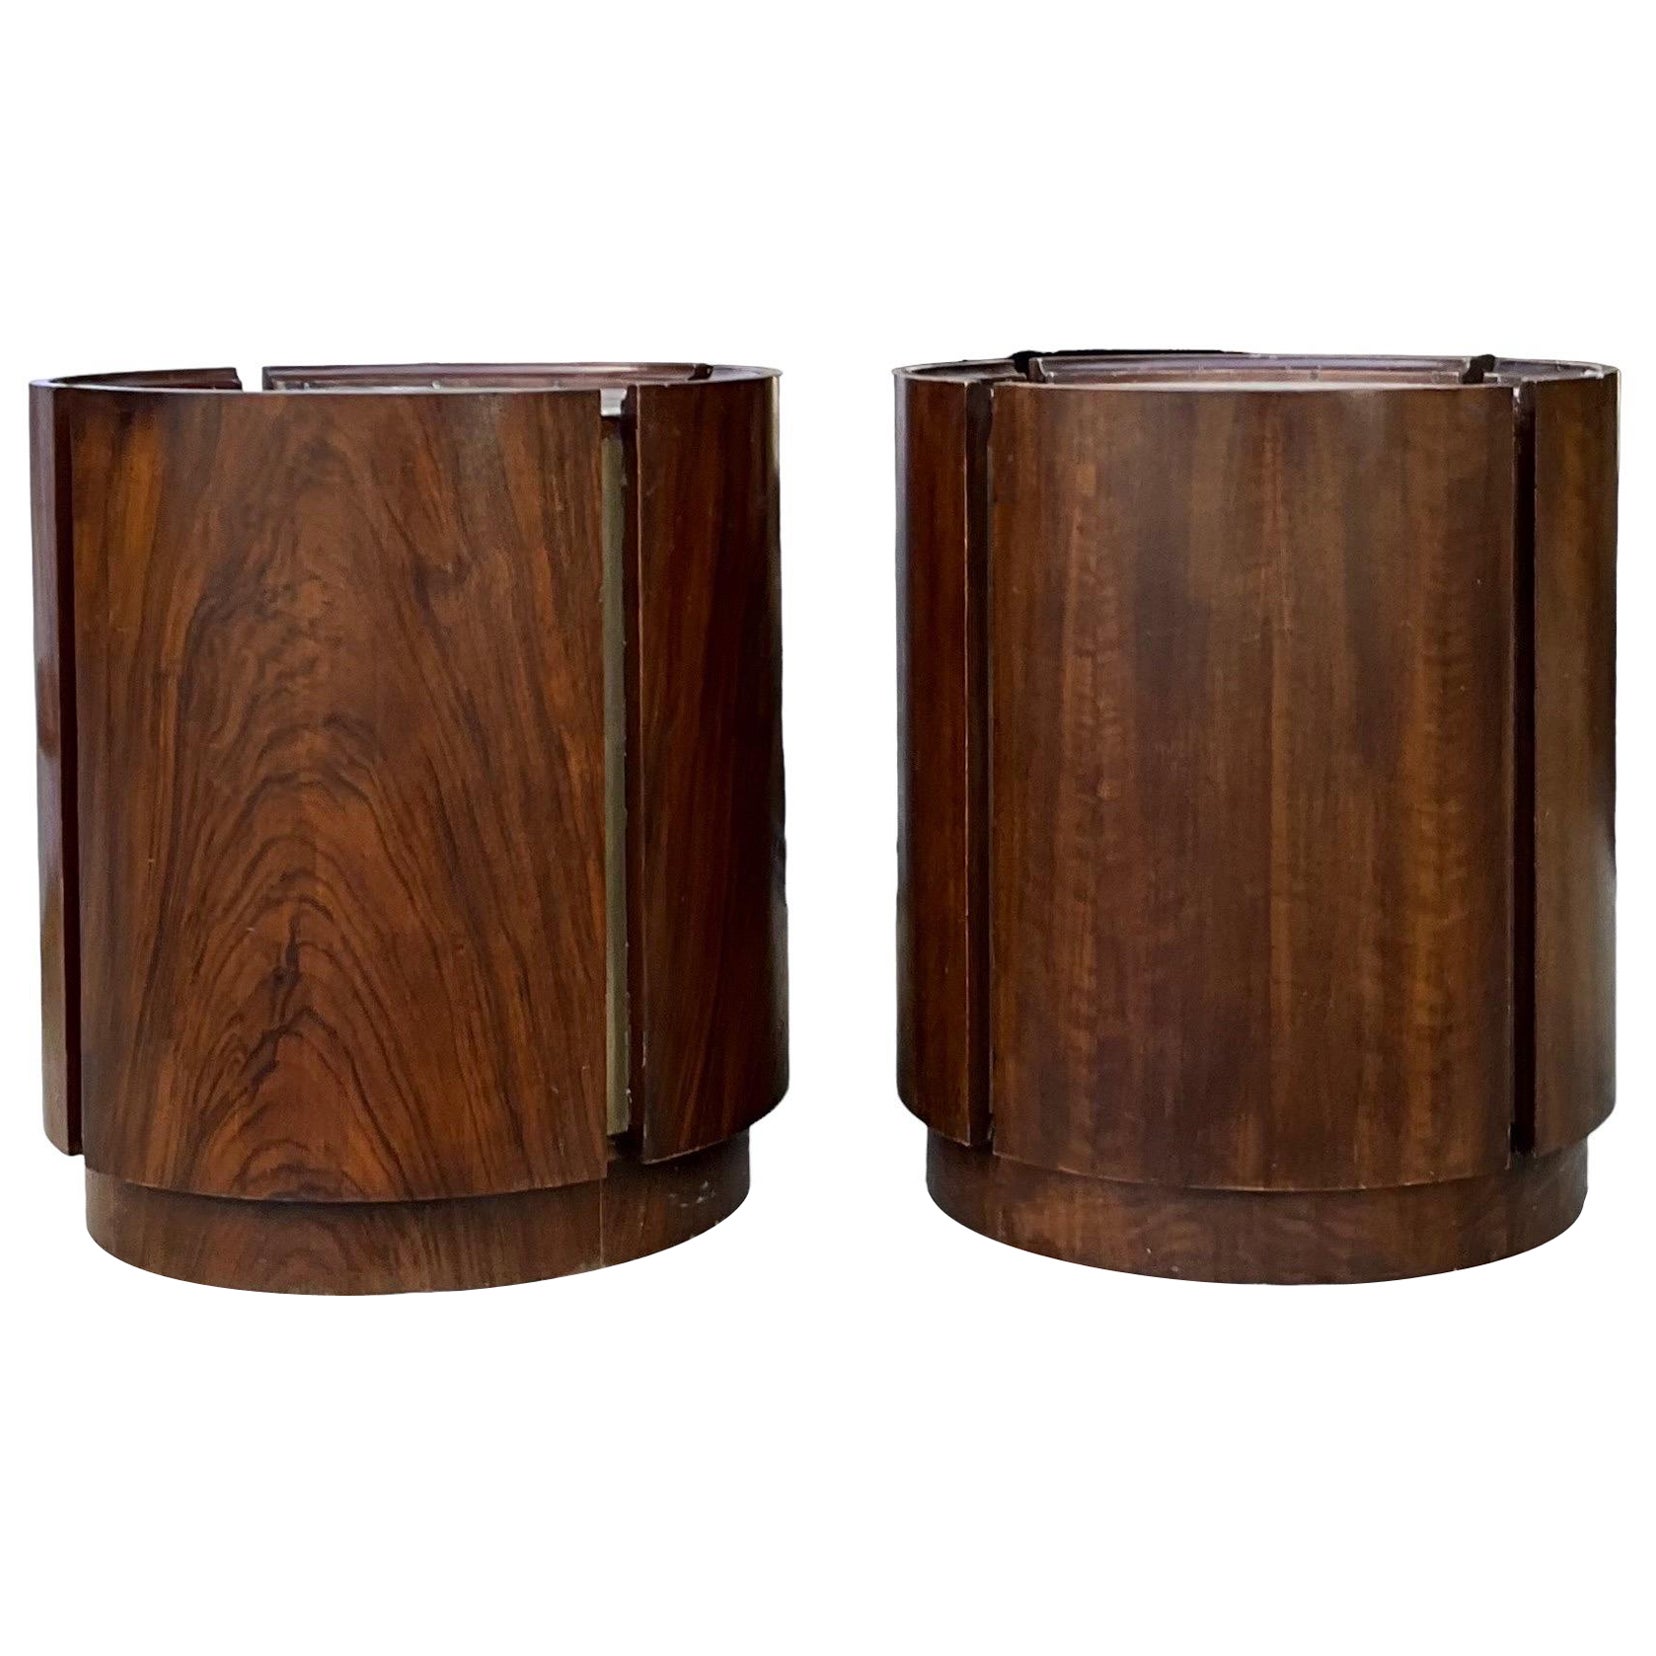 Mid-Century Modern Walnut And Brass Cylinder Form Drum Tables -Pair For Sale